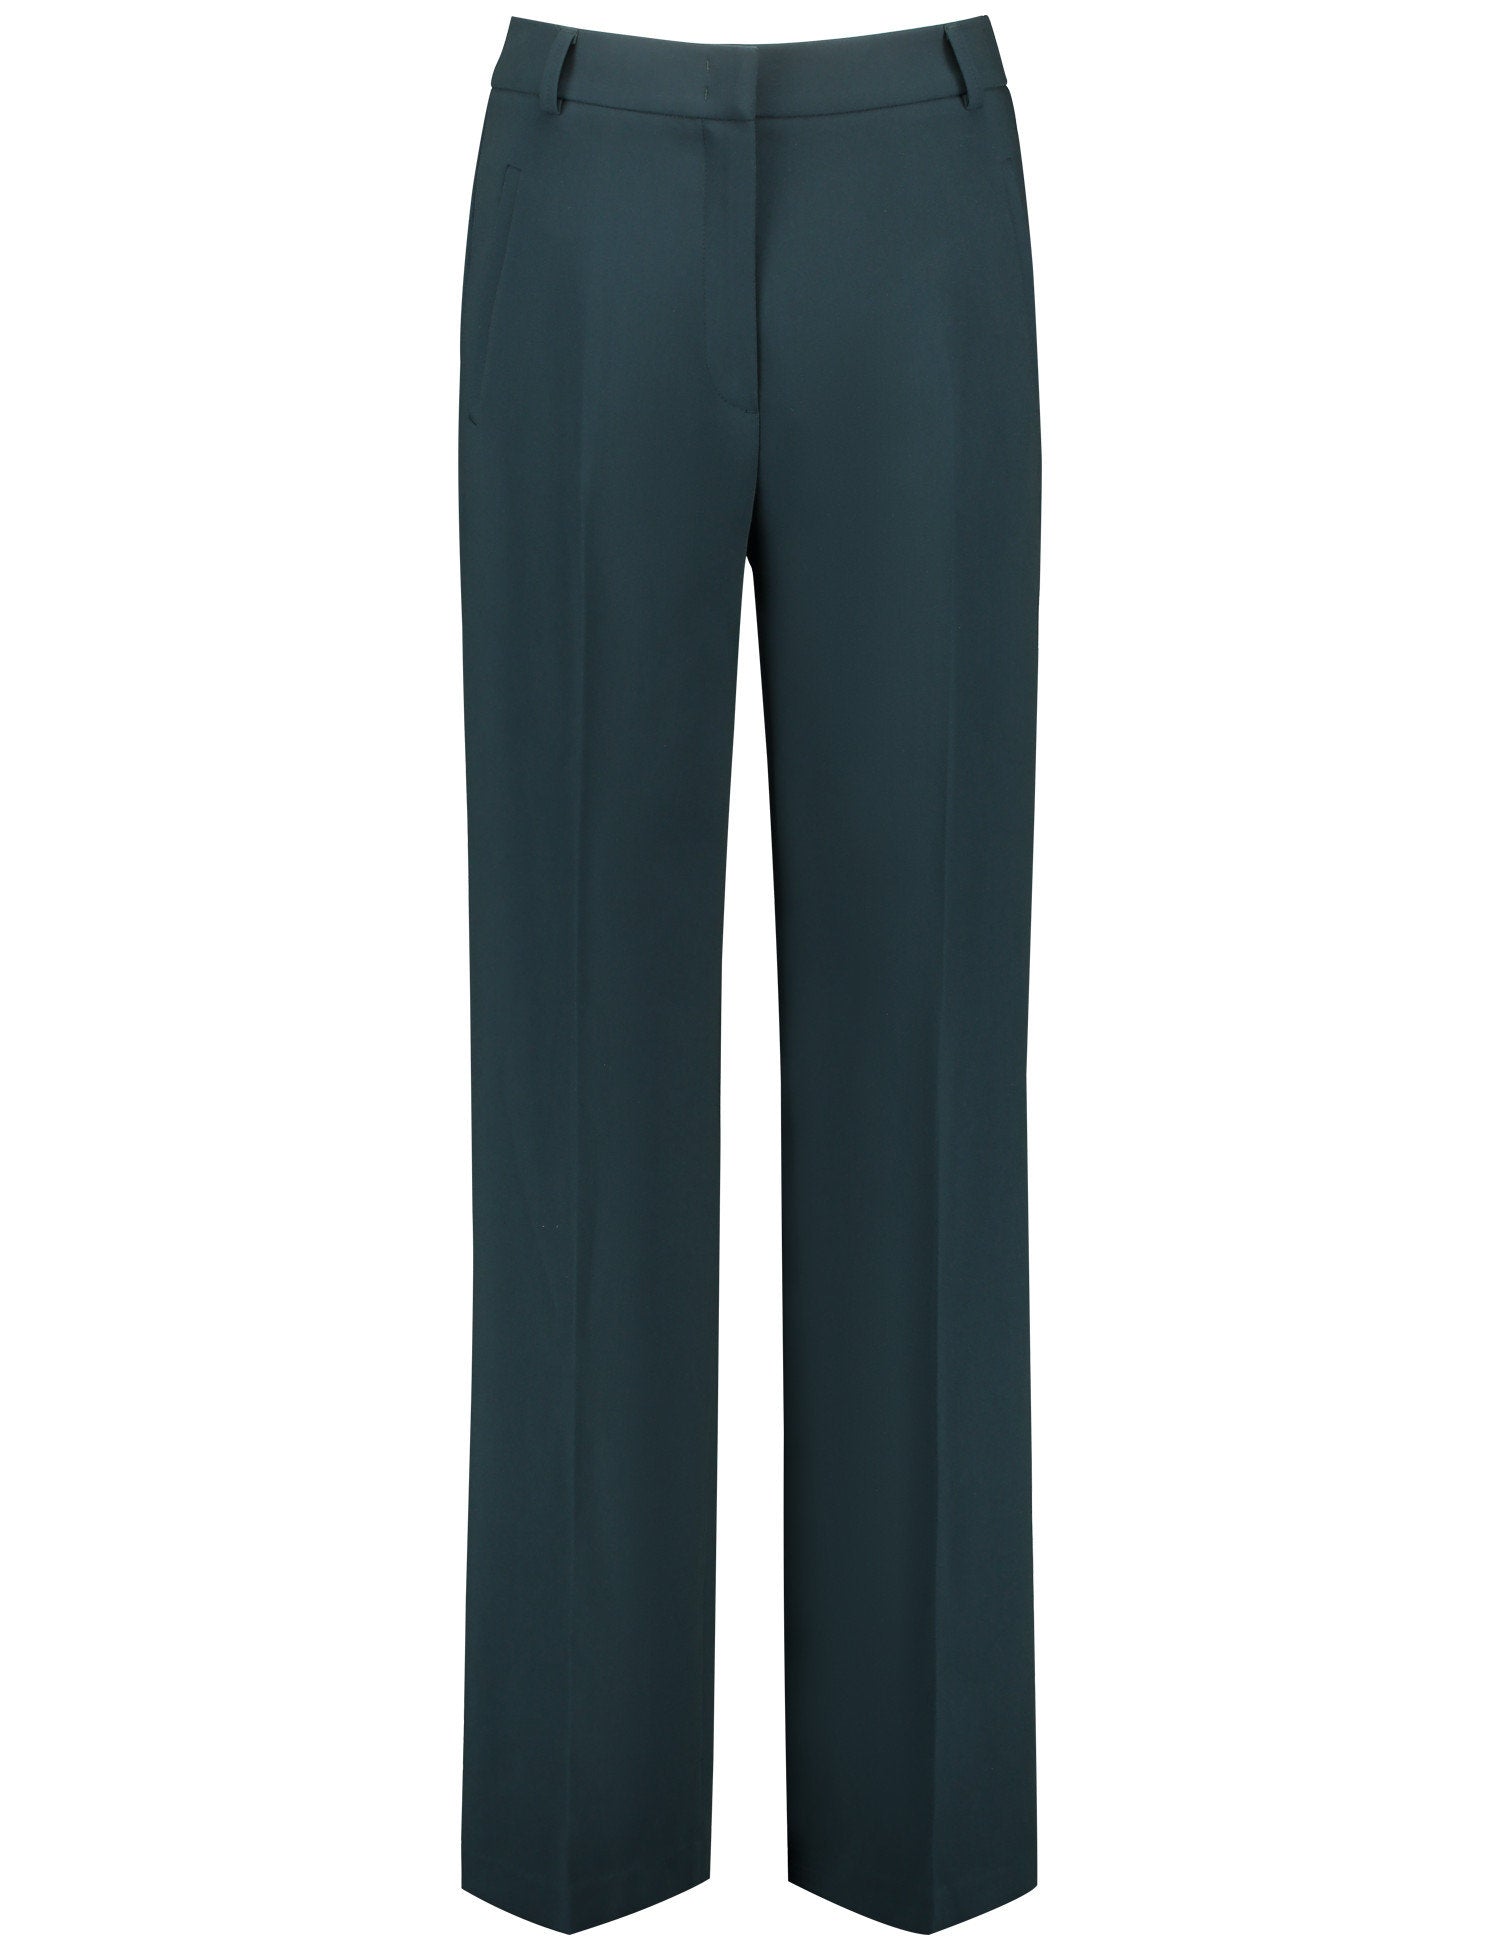 Green Dress Trousers With Center Pleat_220030-31340_50939_01